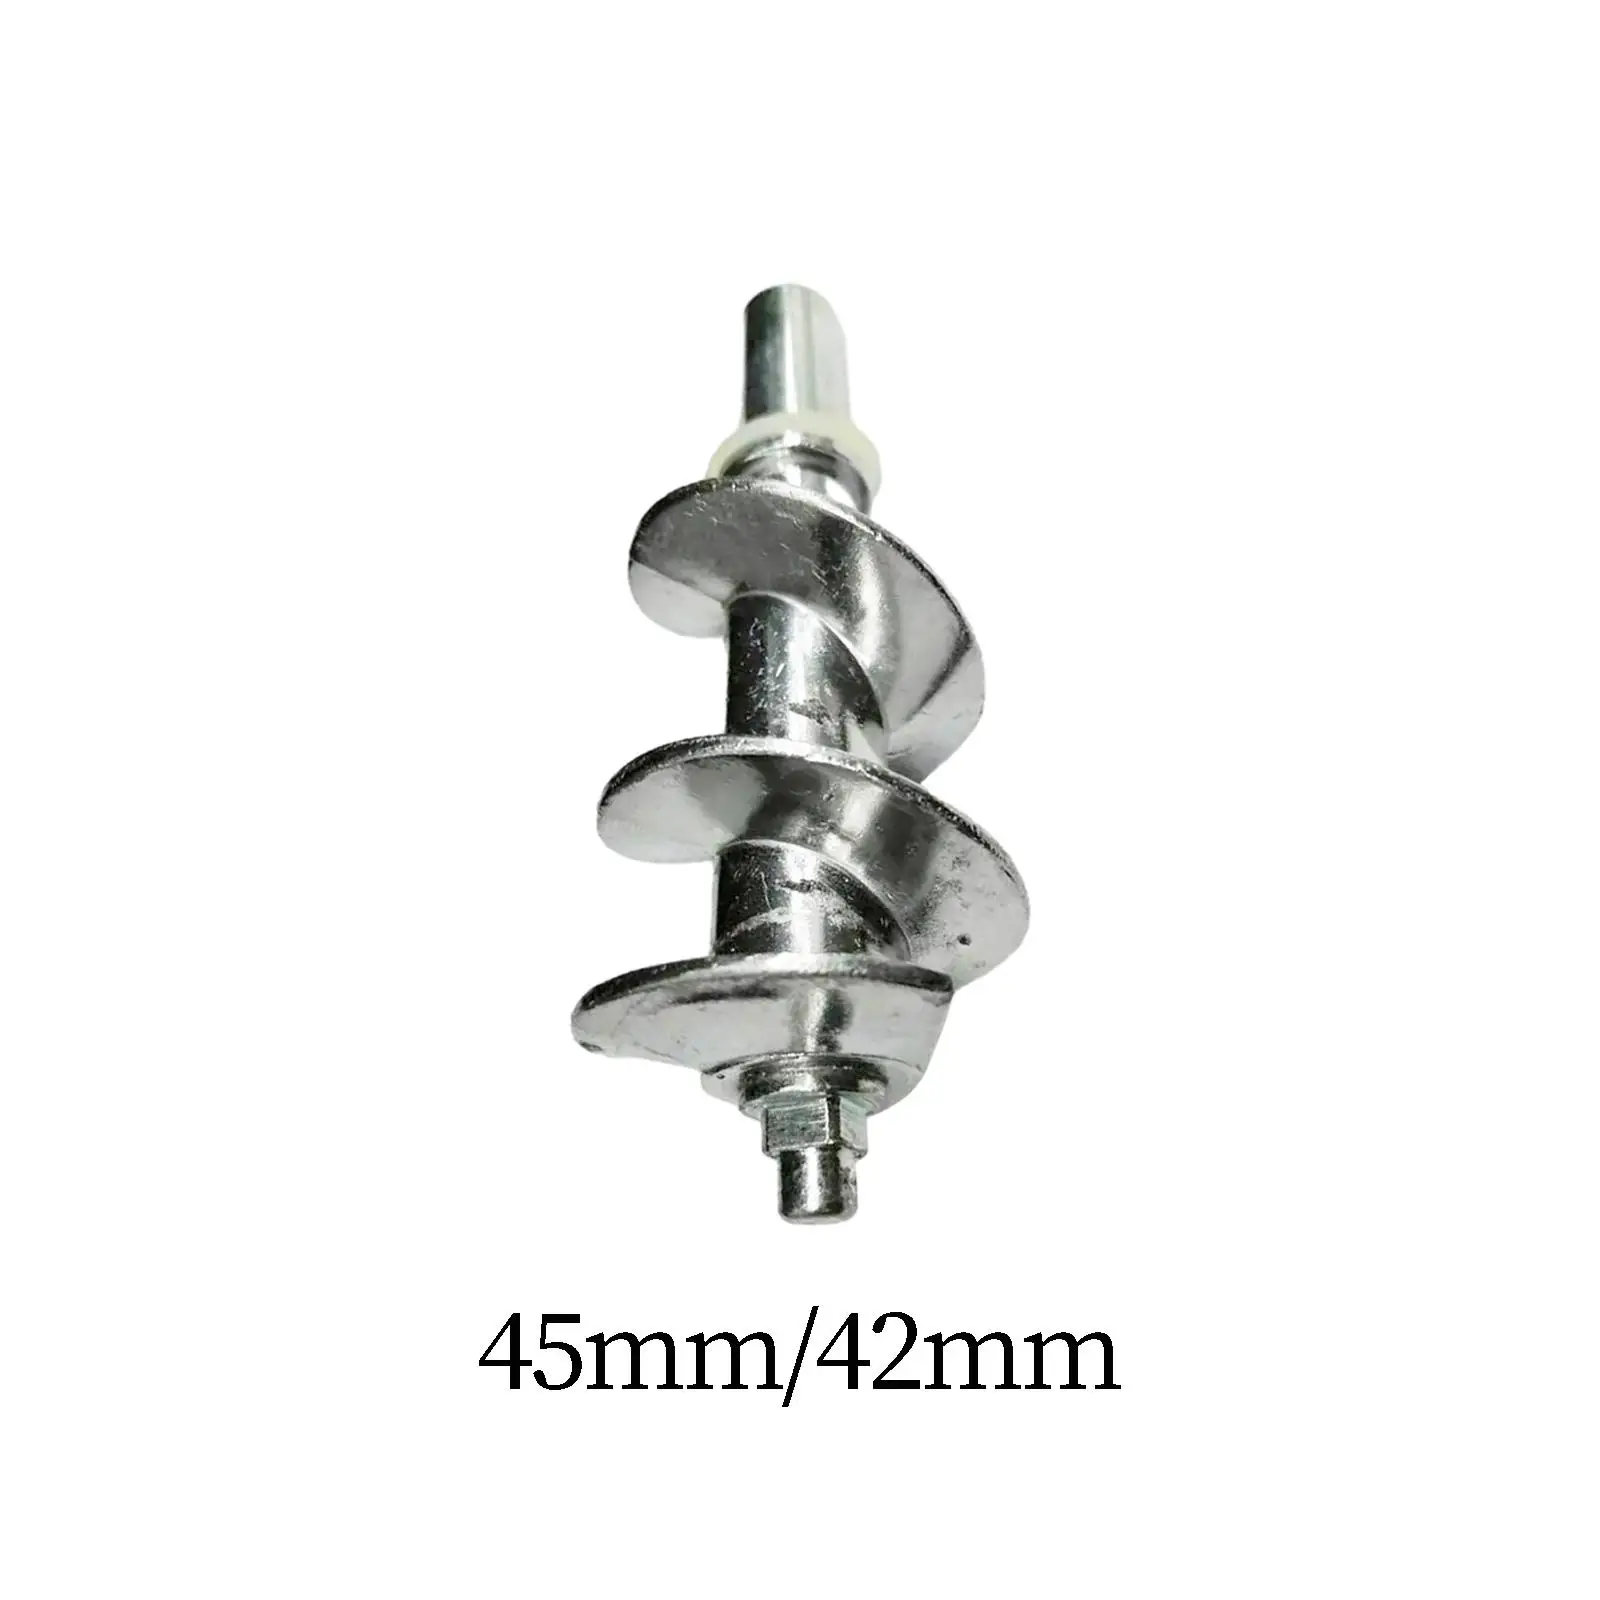 Meat Grinder Screw Auger Accessories Fittings Replacement Meat Grinder Screw for G28prpwdr Pmg 2008 G20prpwdr G1300 MG1300